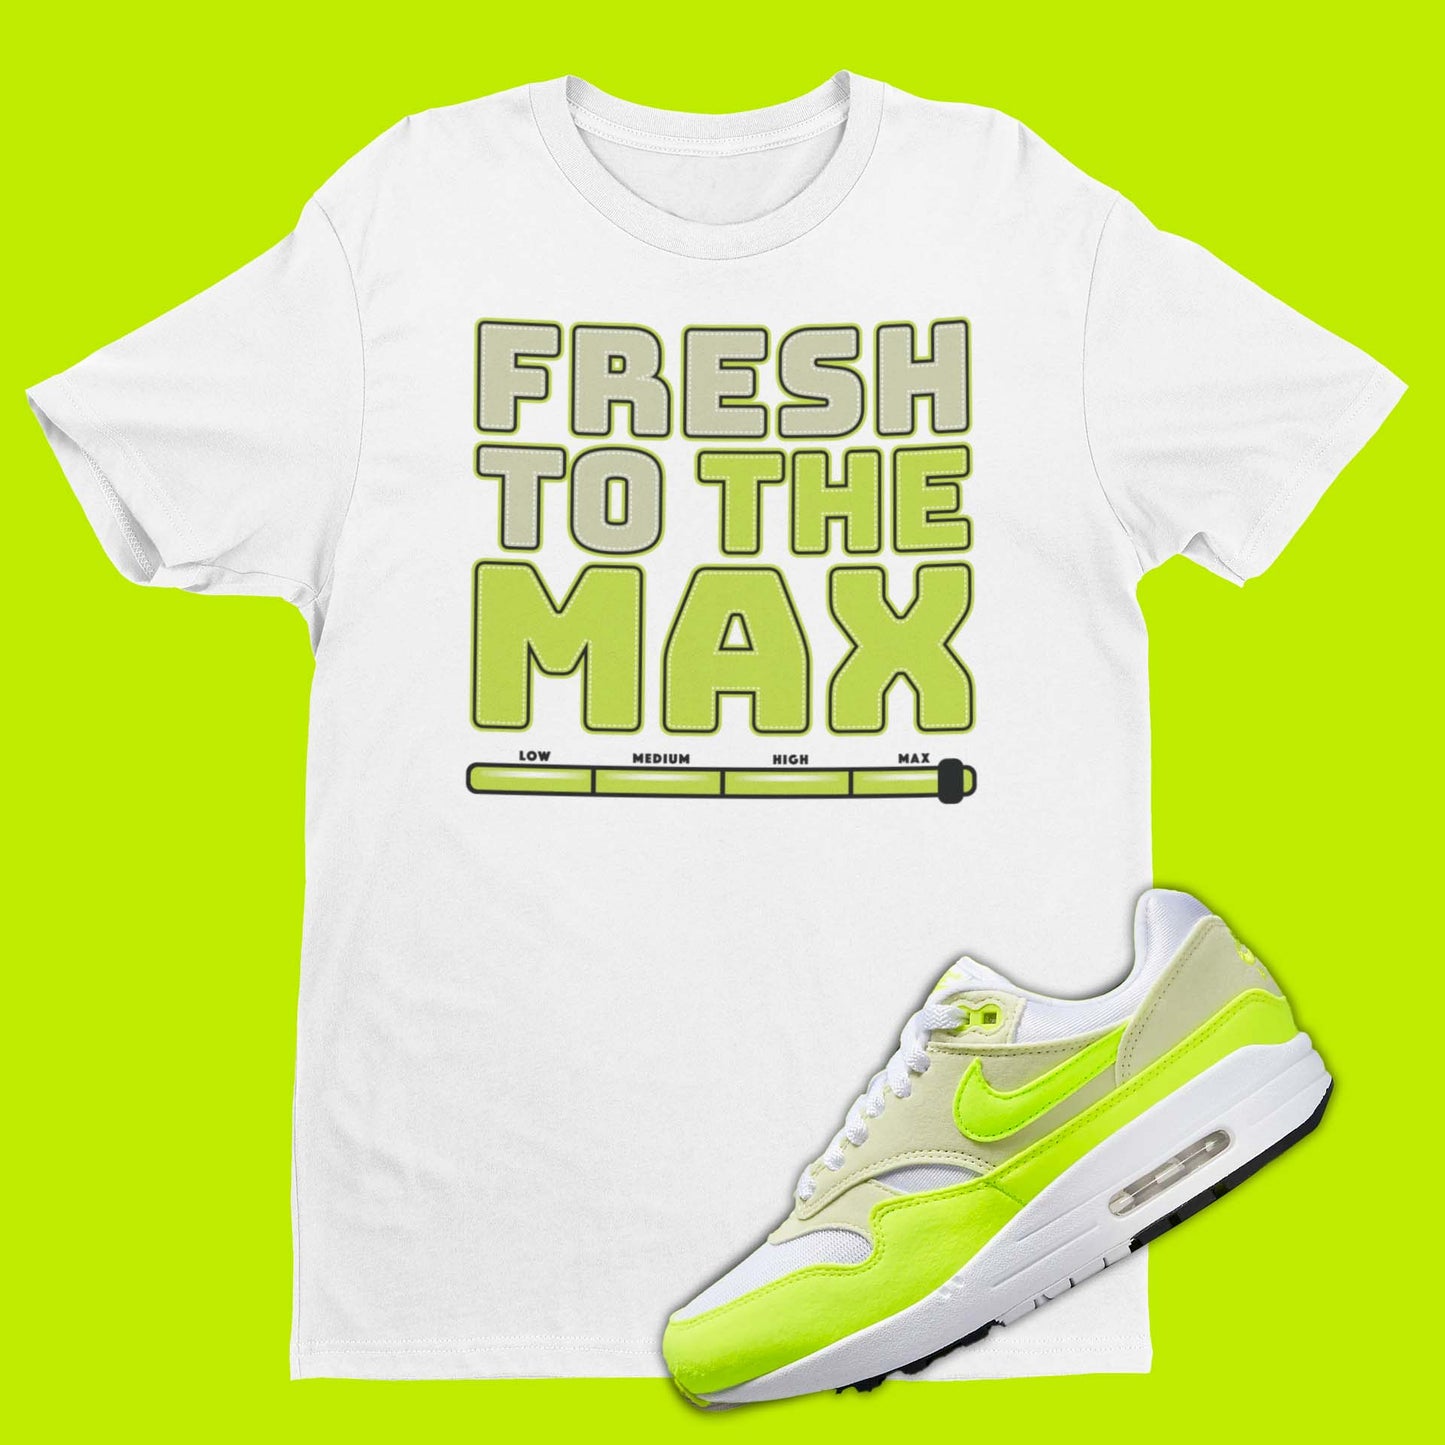 Fresh To The Max Nike Air Max 1 Volt Suede Matching T-Shirt from SNKADX.